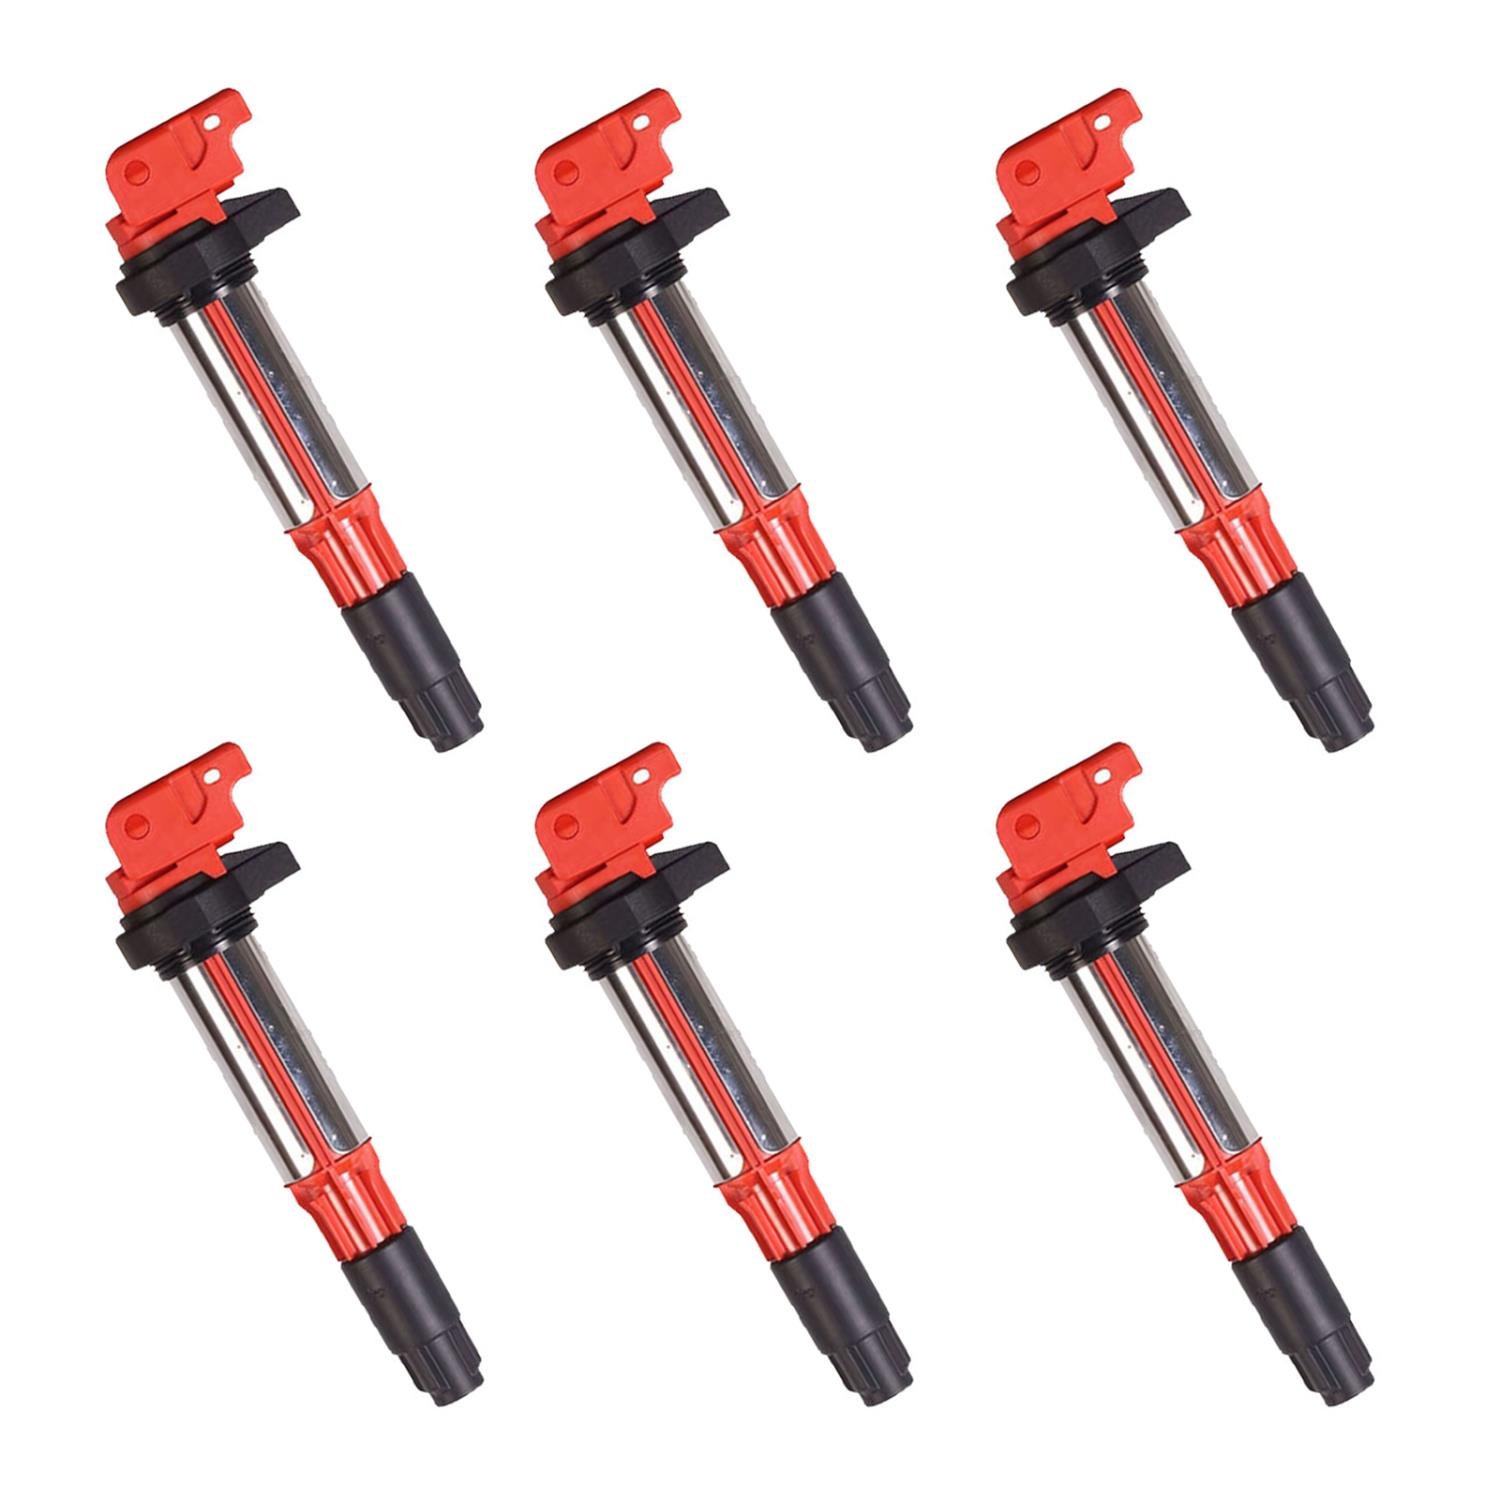 High-Performance Ignition Coils for BMW 750i 550i 650i X5 4.8L [Red]